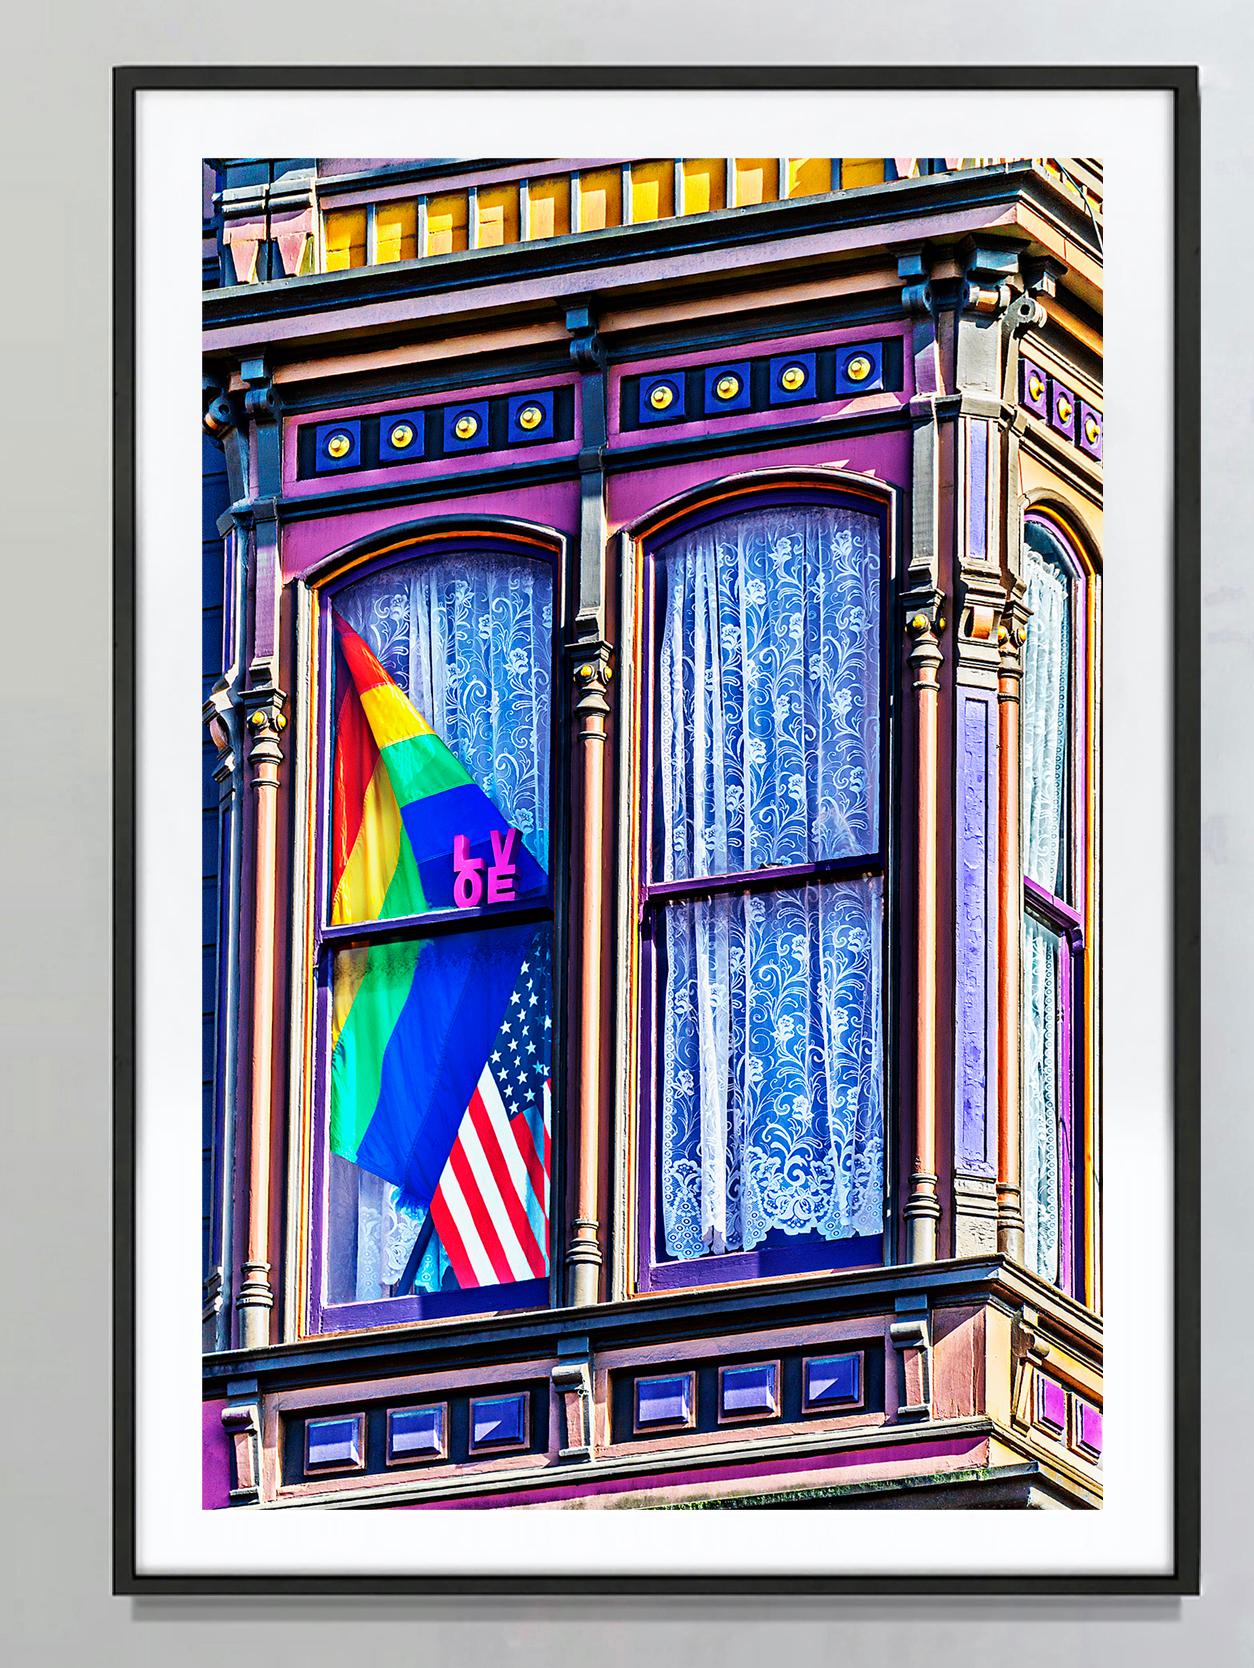 Victorian House Window With Pride Flag And American Flag, San Francisco - Photograph by Mitchell Funk